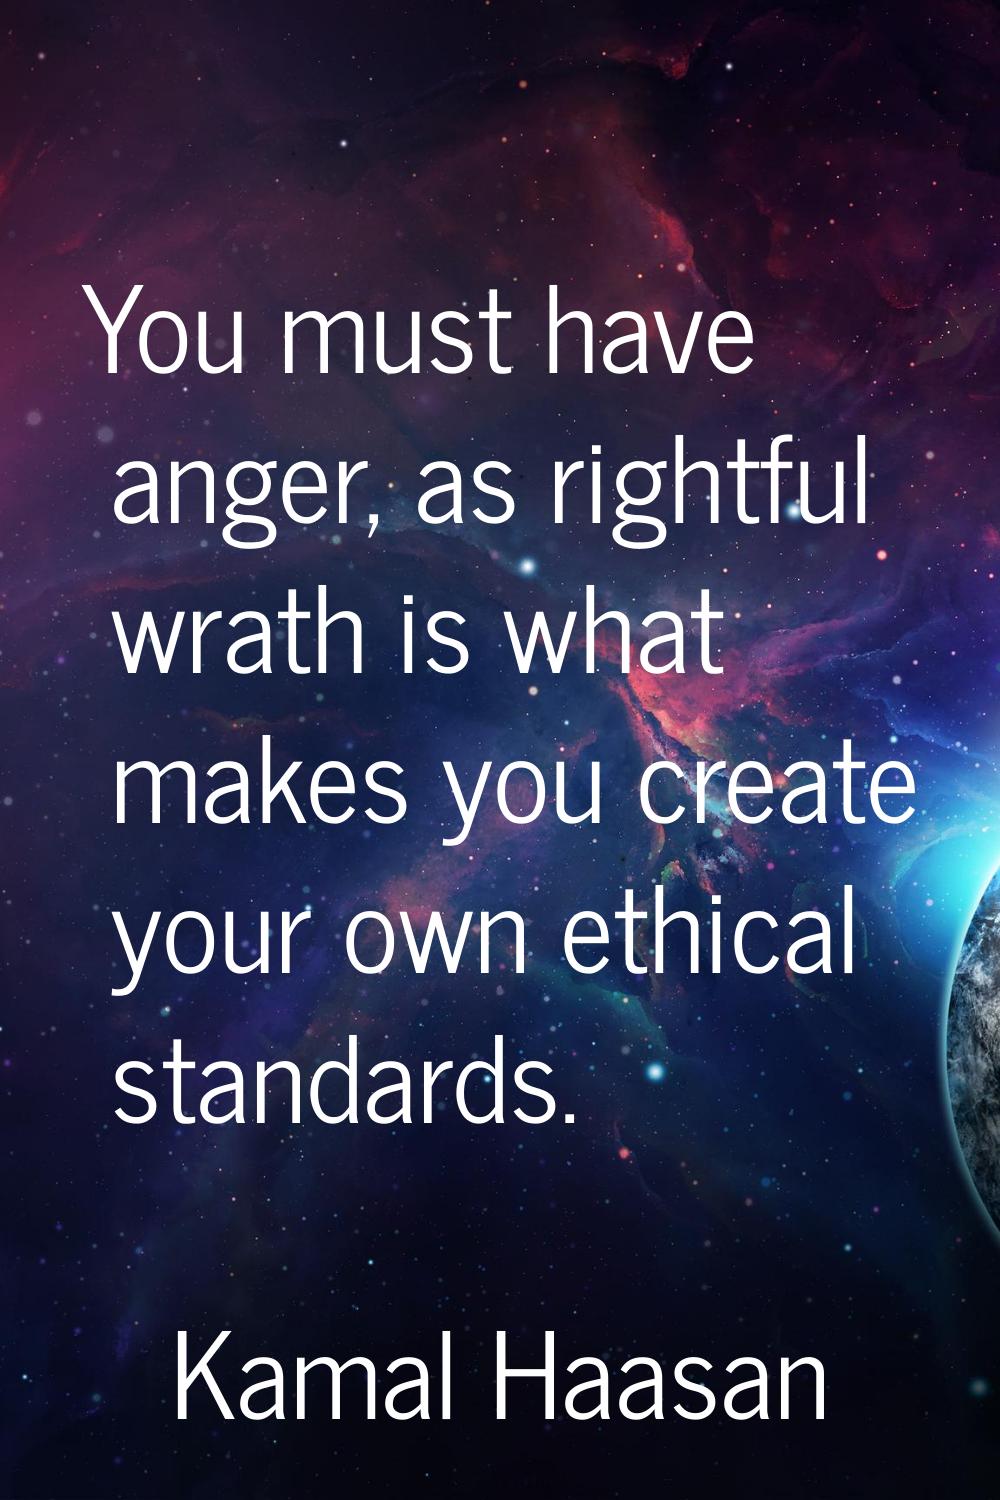 You must have anger, as rightful wrath is what makes you create your own ethical standards.